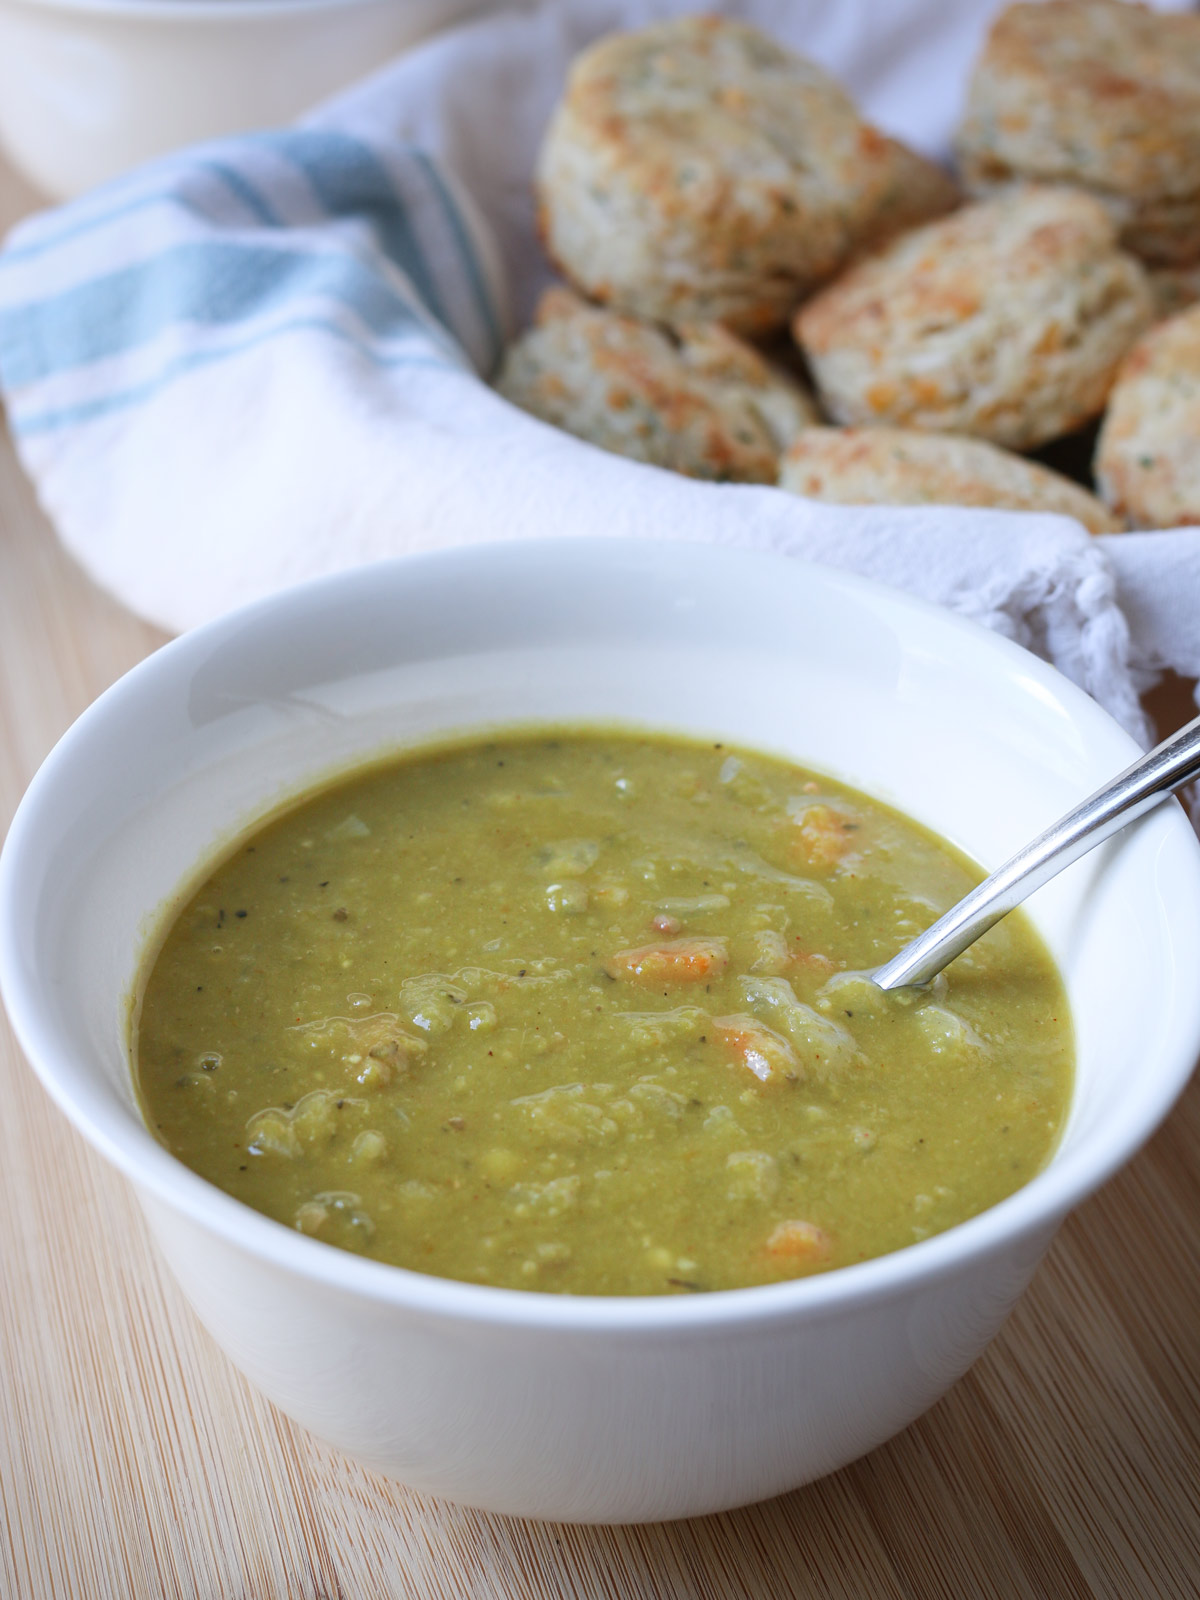 bowl of split pea soup on wood table, with basket of cheese biscuits in background.